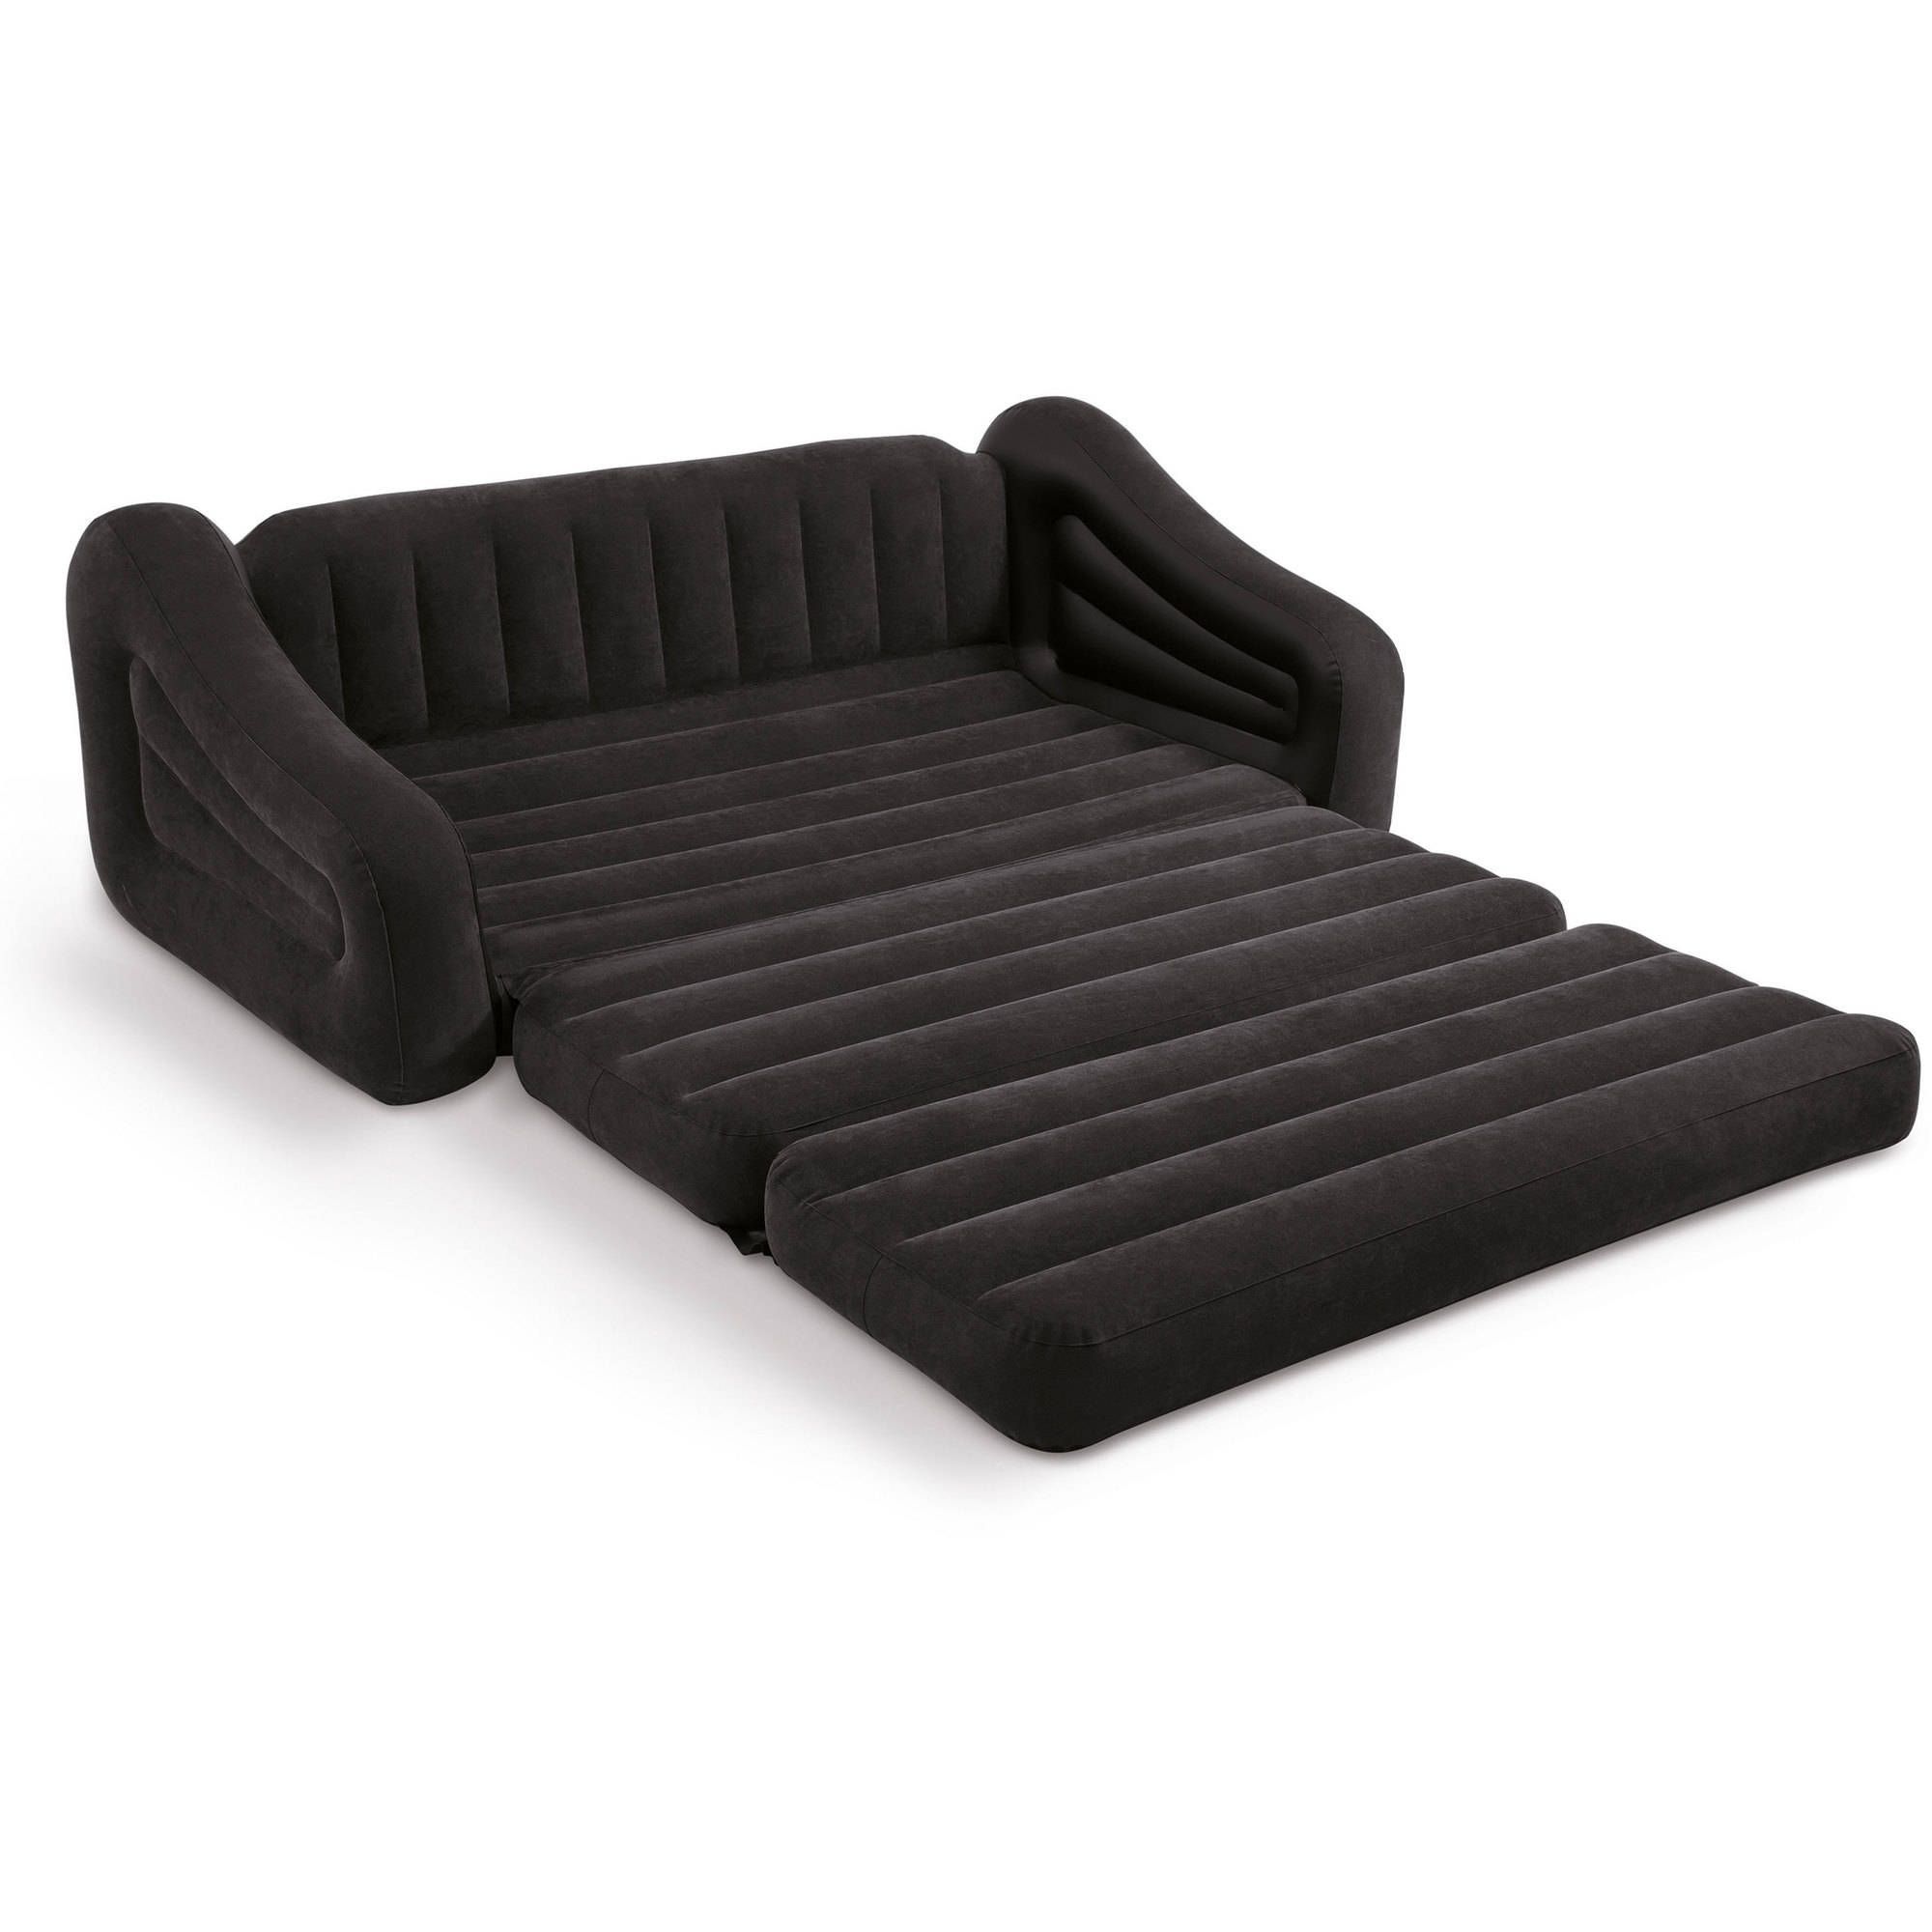 Inflatable Sofas And Chairs With Regard To Most Recent Intex Queen Inflatable Pull Out Sofa Bed – Walmart (View 15 of 20)